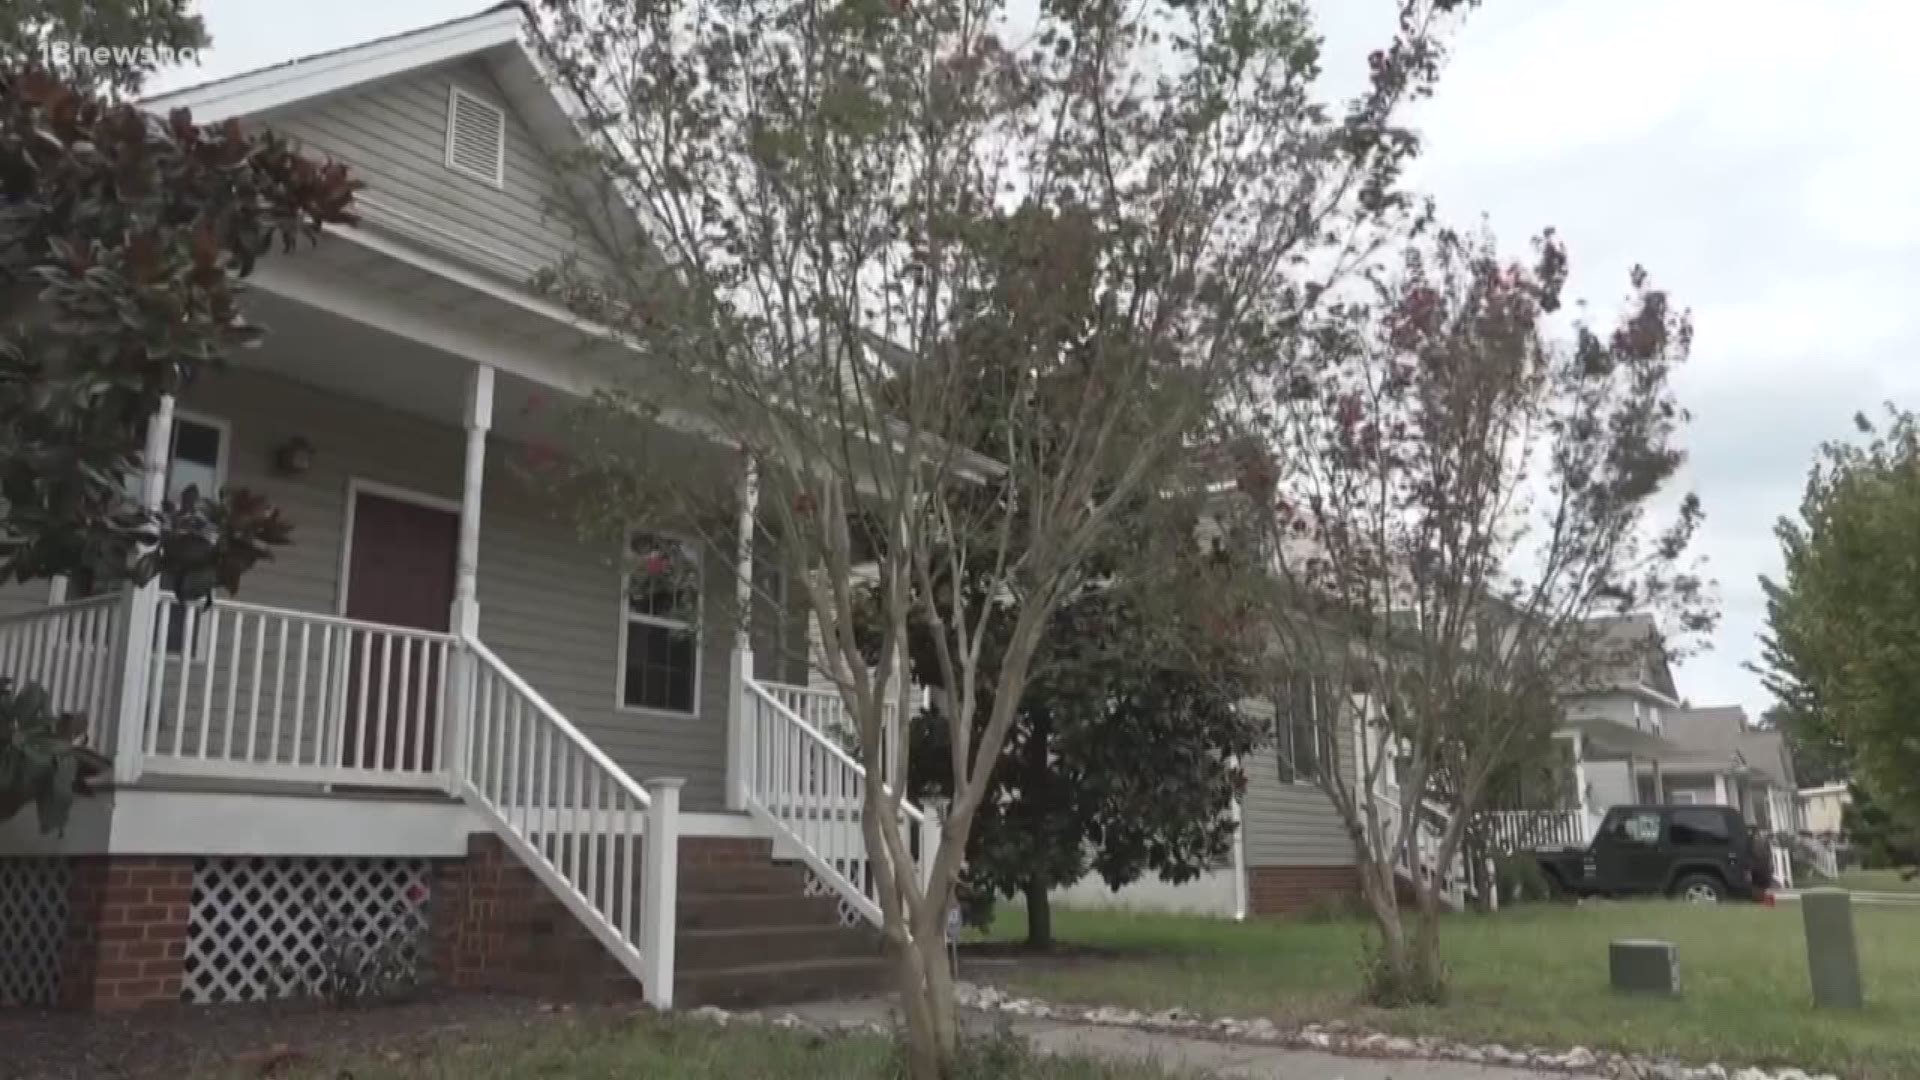 James City County is tackling housing issues head-on. They'll create low-income housing in the area that will allow families to stay in the area longer.